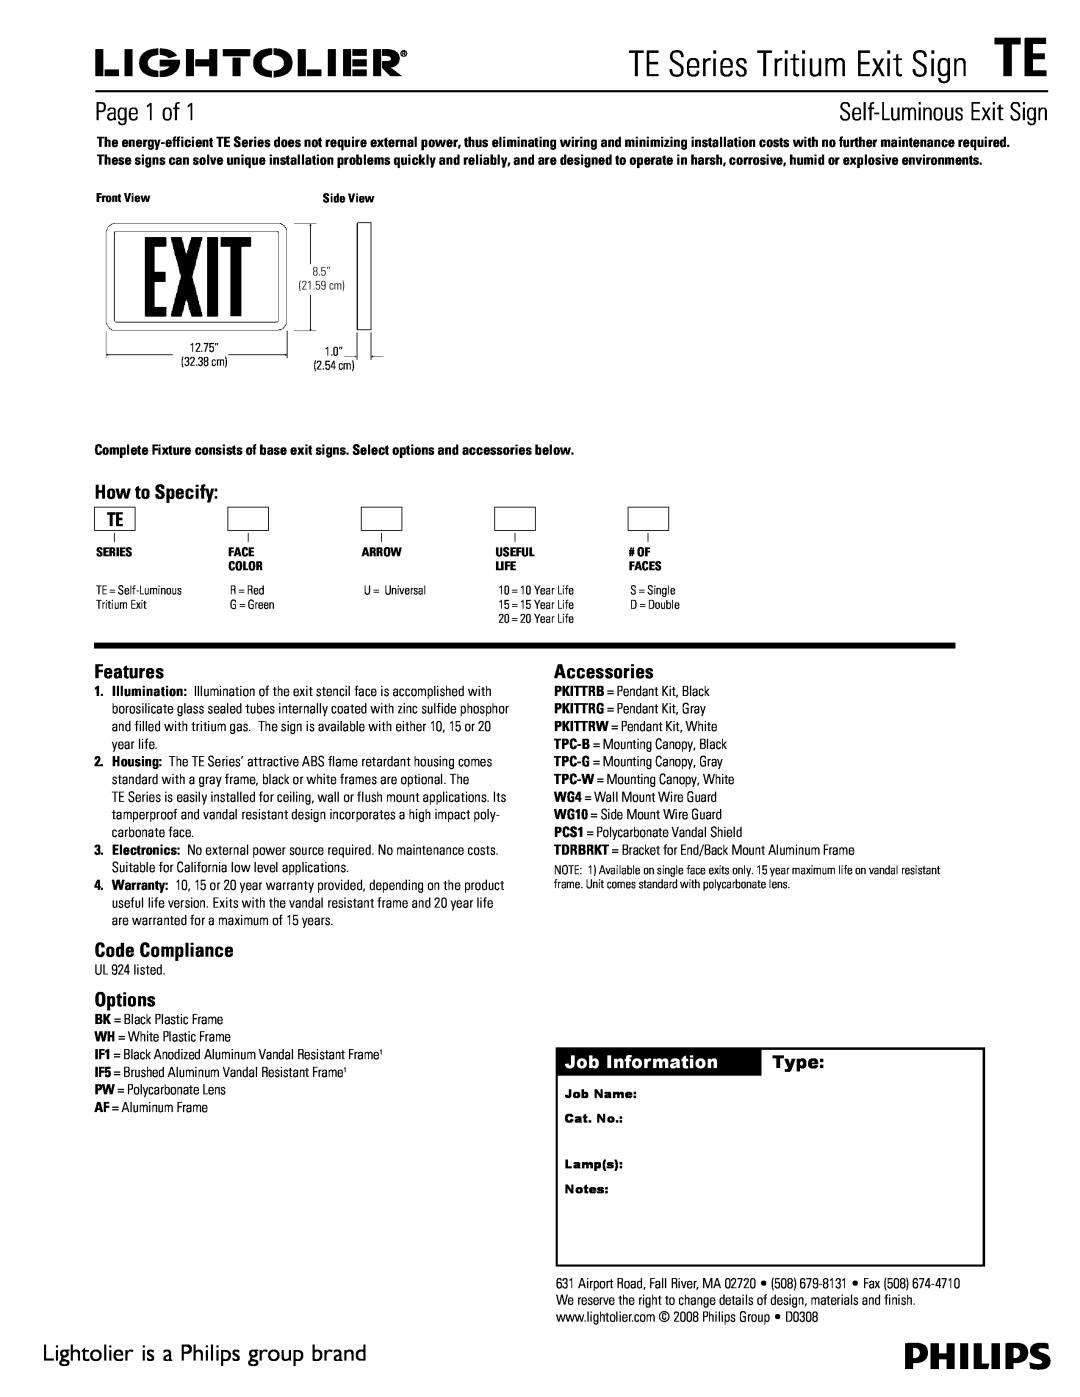 Lightolier TE Series warranty TE Series Tritium Exit SignTE, Self-LuminousExit Sign, Page 1 of, How to Specify TE, Options 